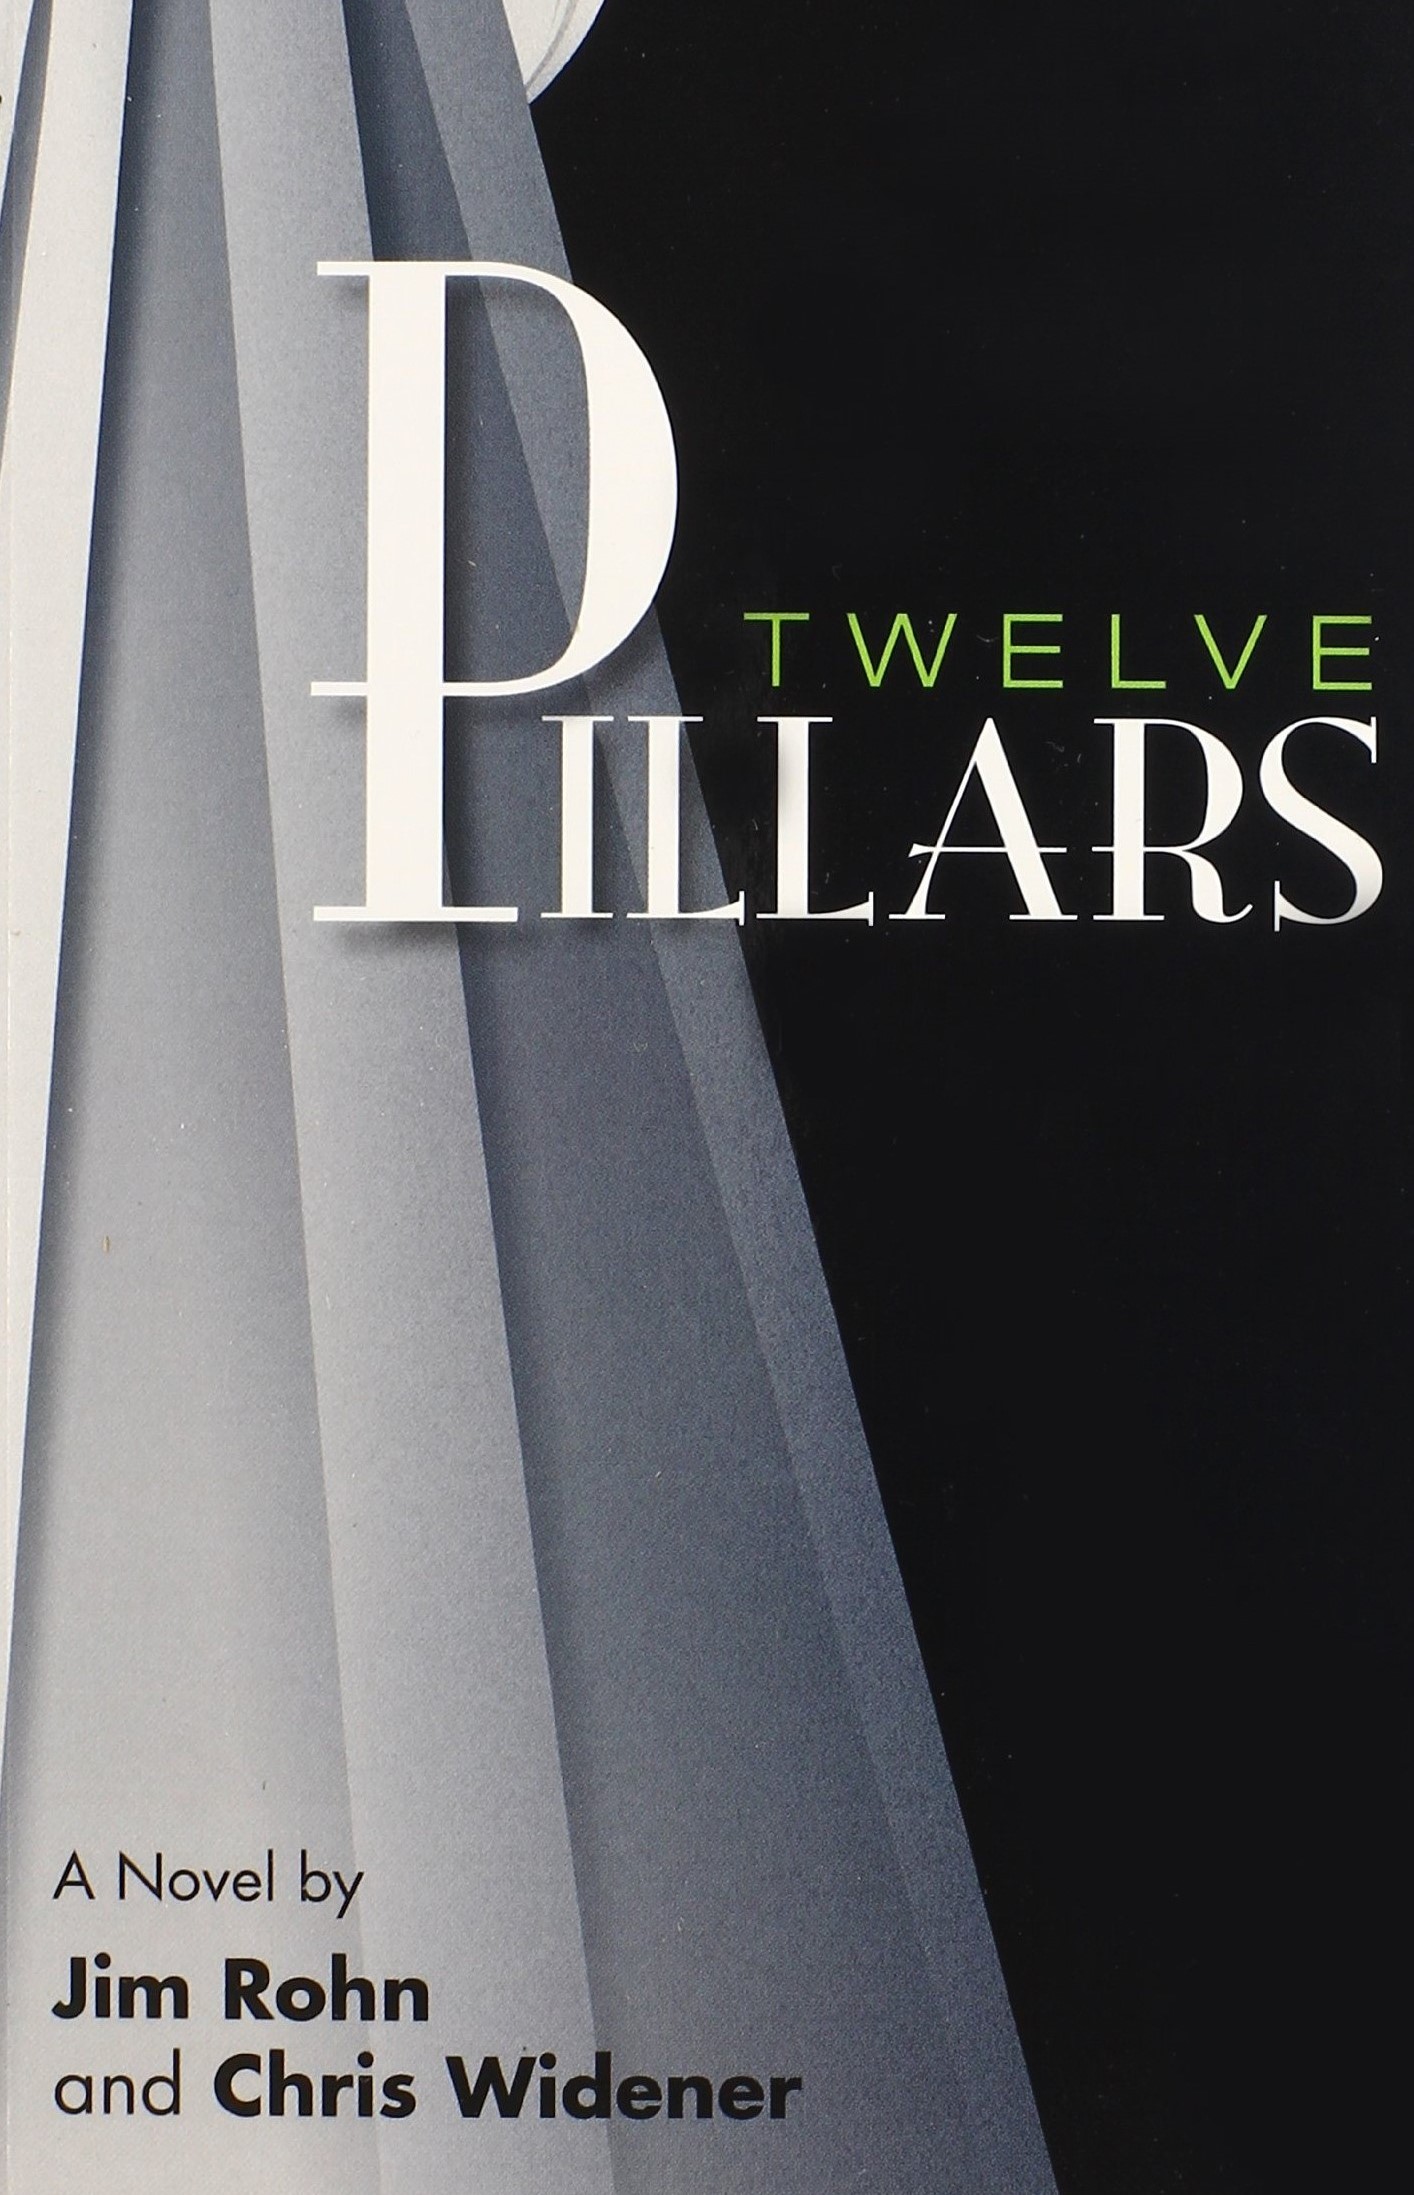 This is a book called twelve pillars